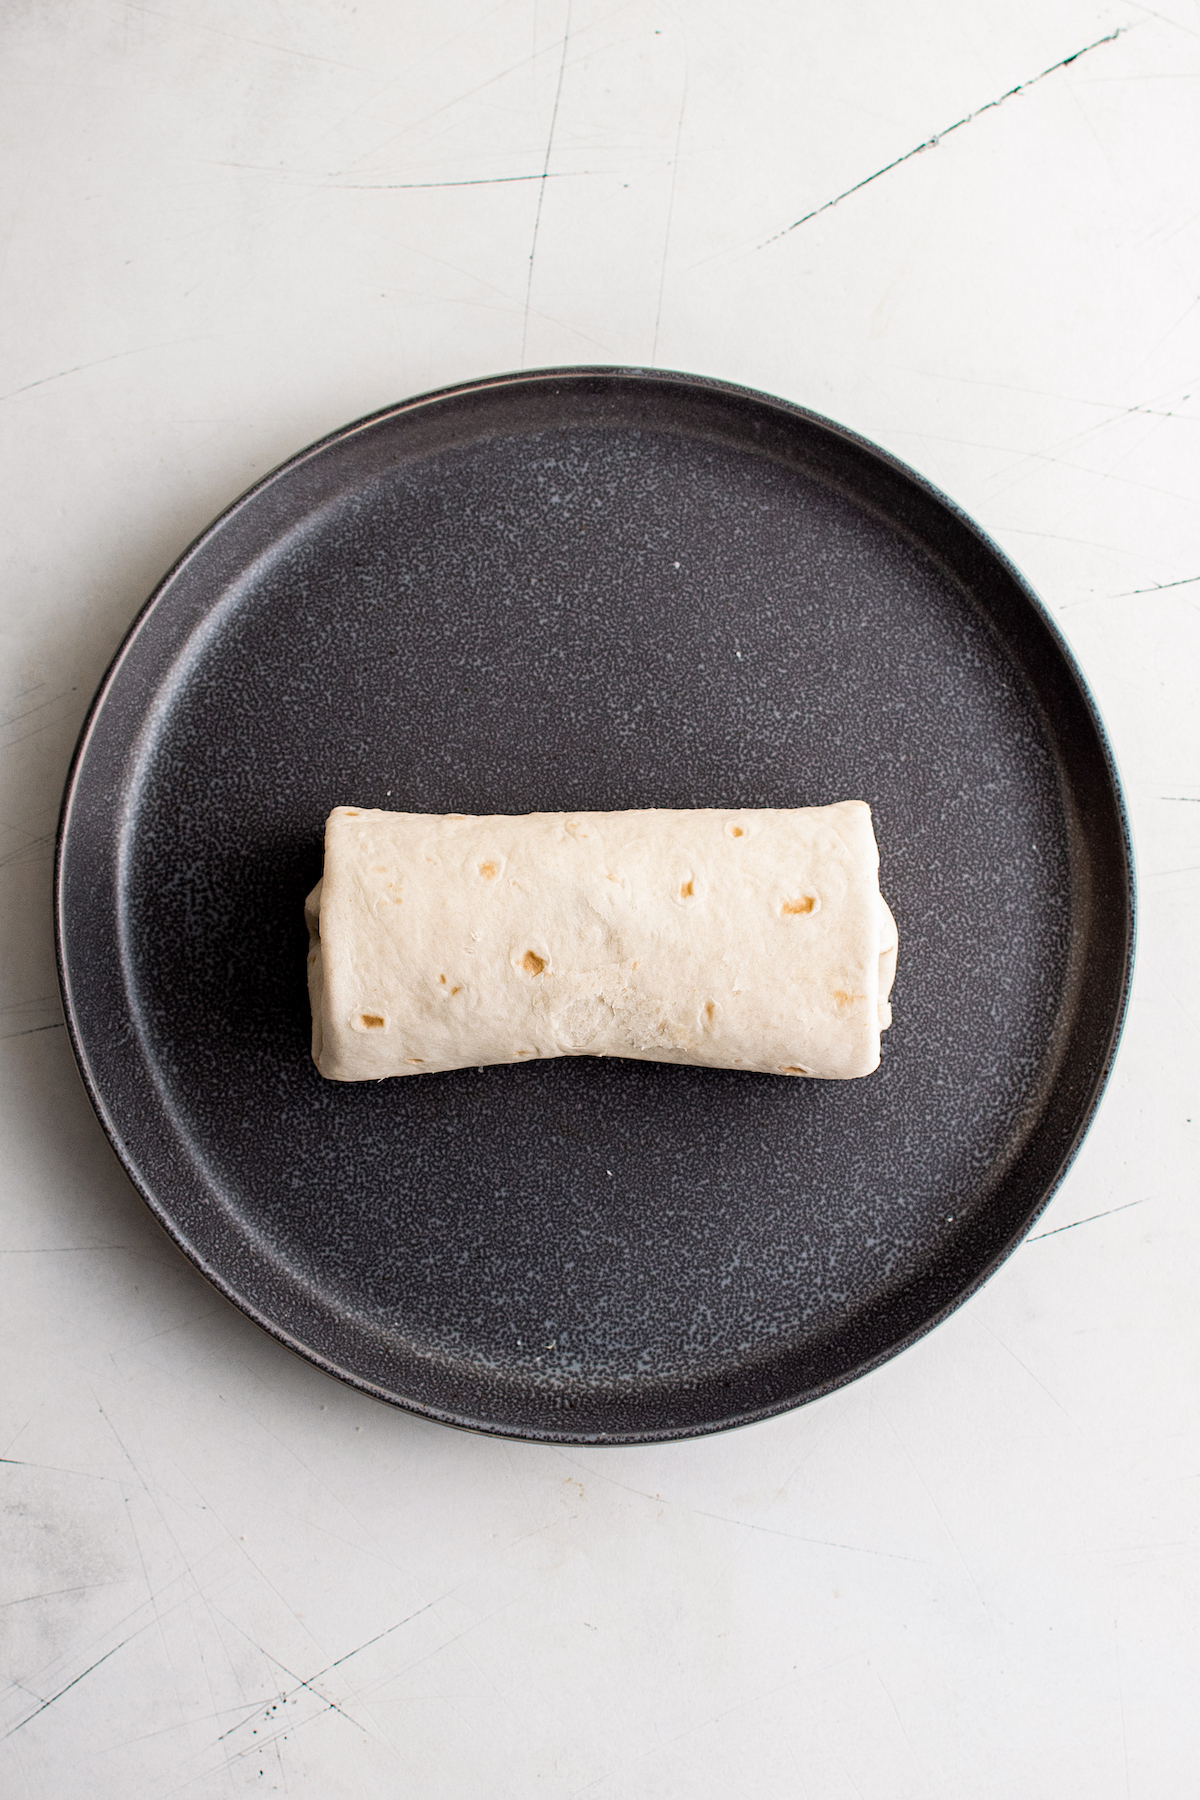 A rolled-up burrito on a black plate.